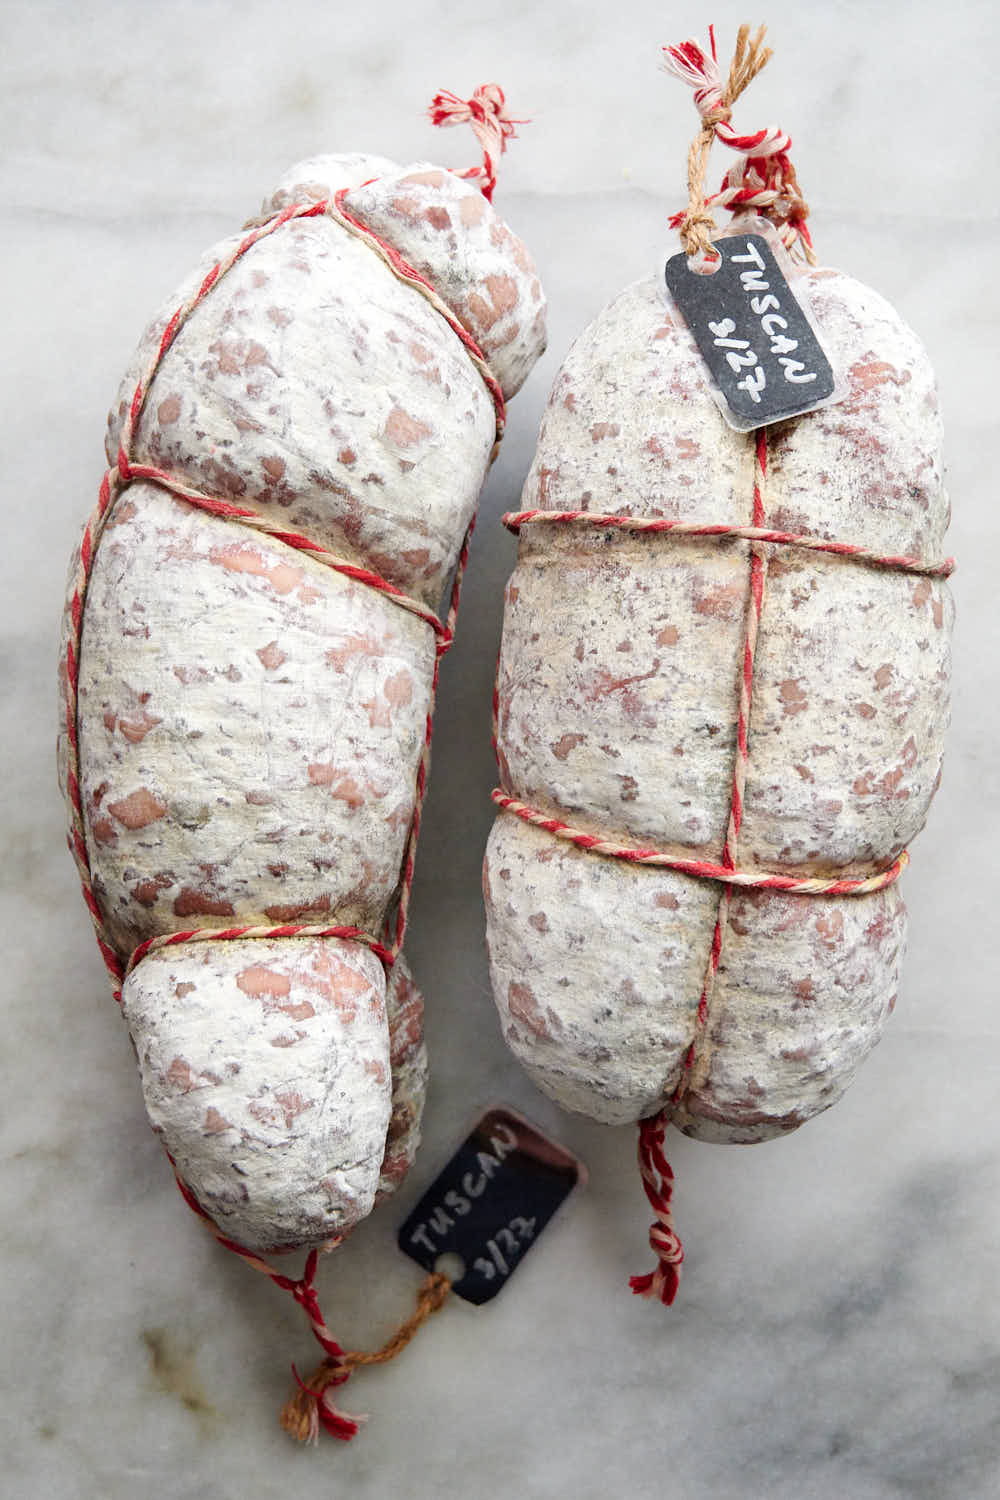 Two Tuscan Salami tied with twine on a table.